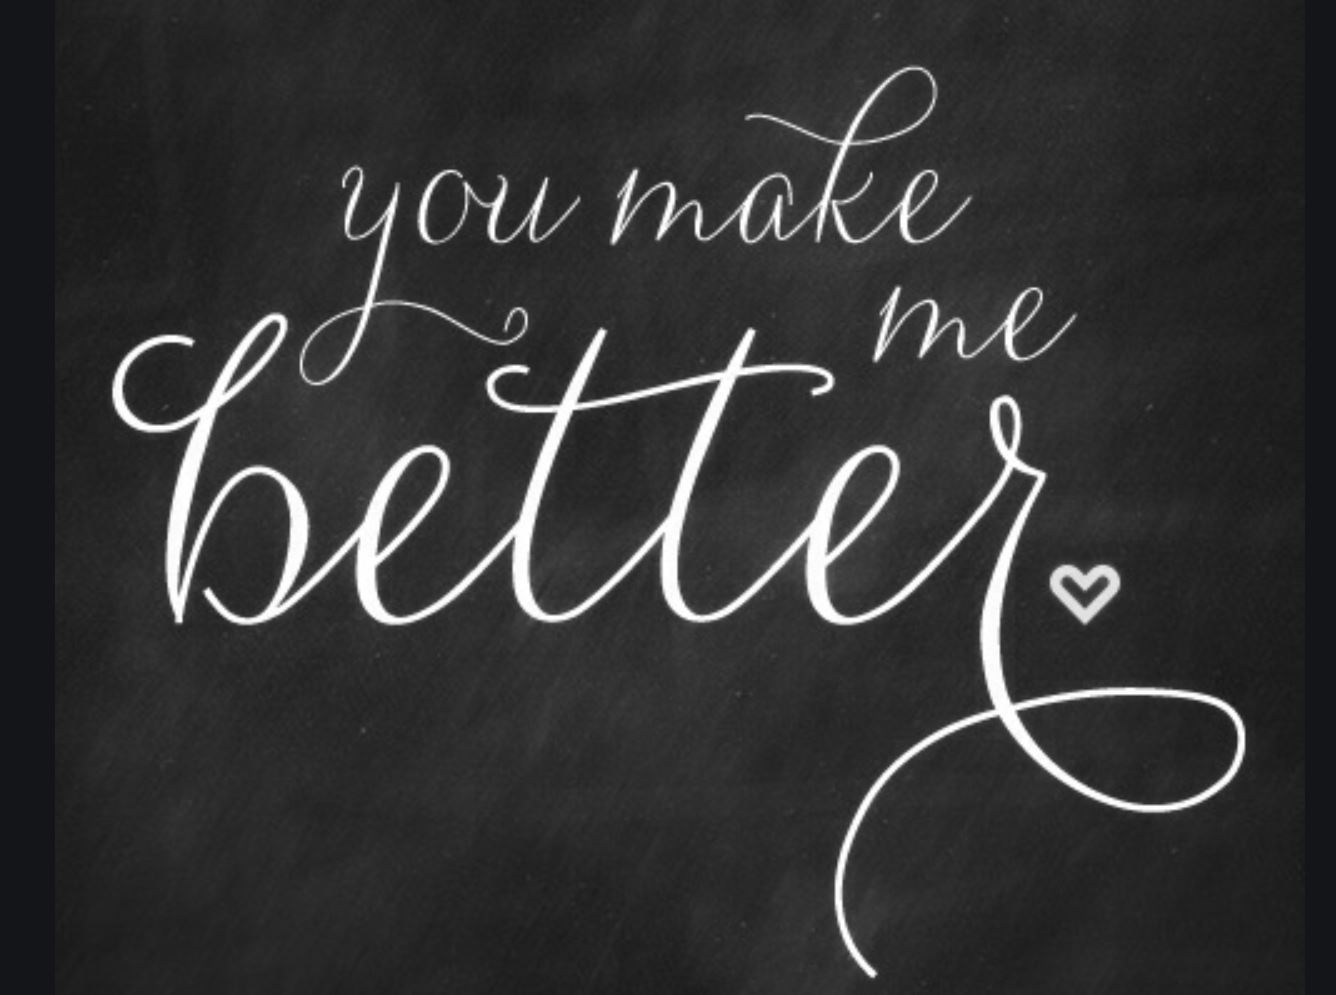 I can do better love. You make me better. You make. One better. I will be better картинки.